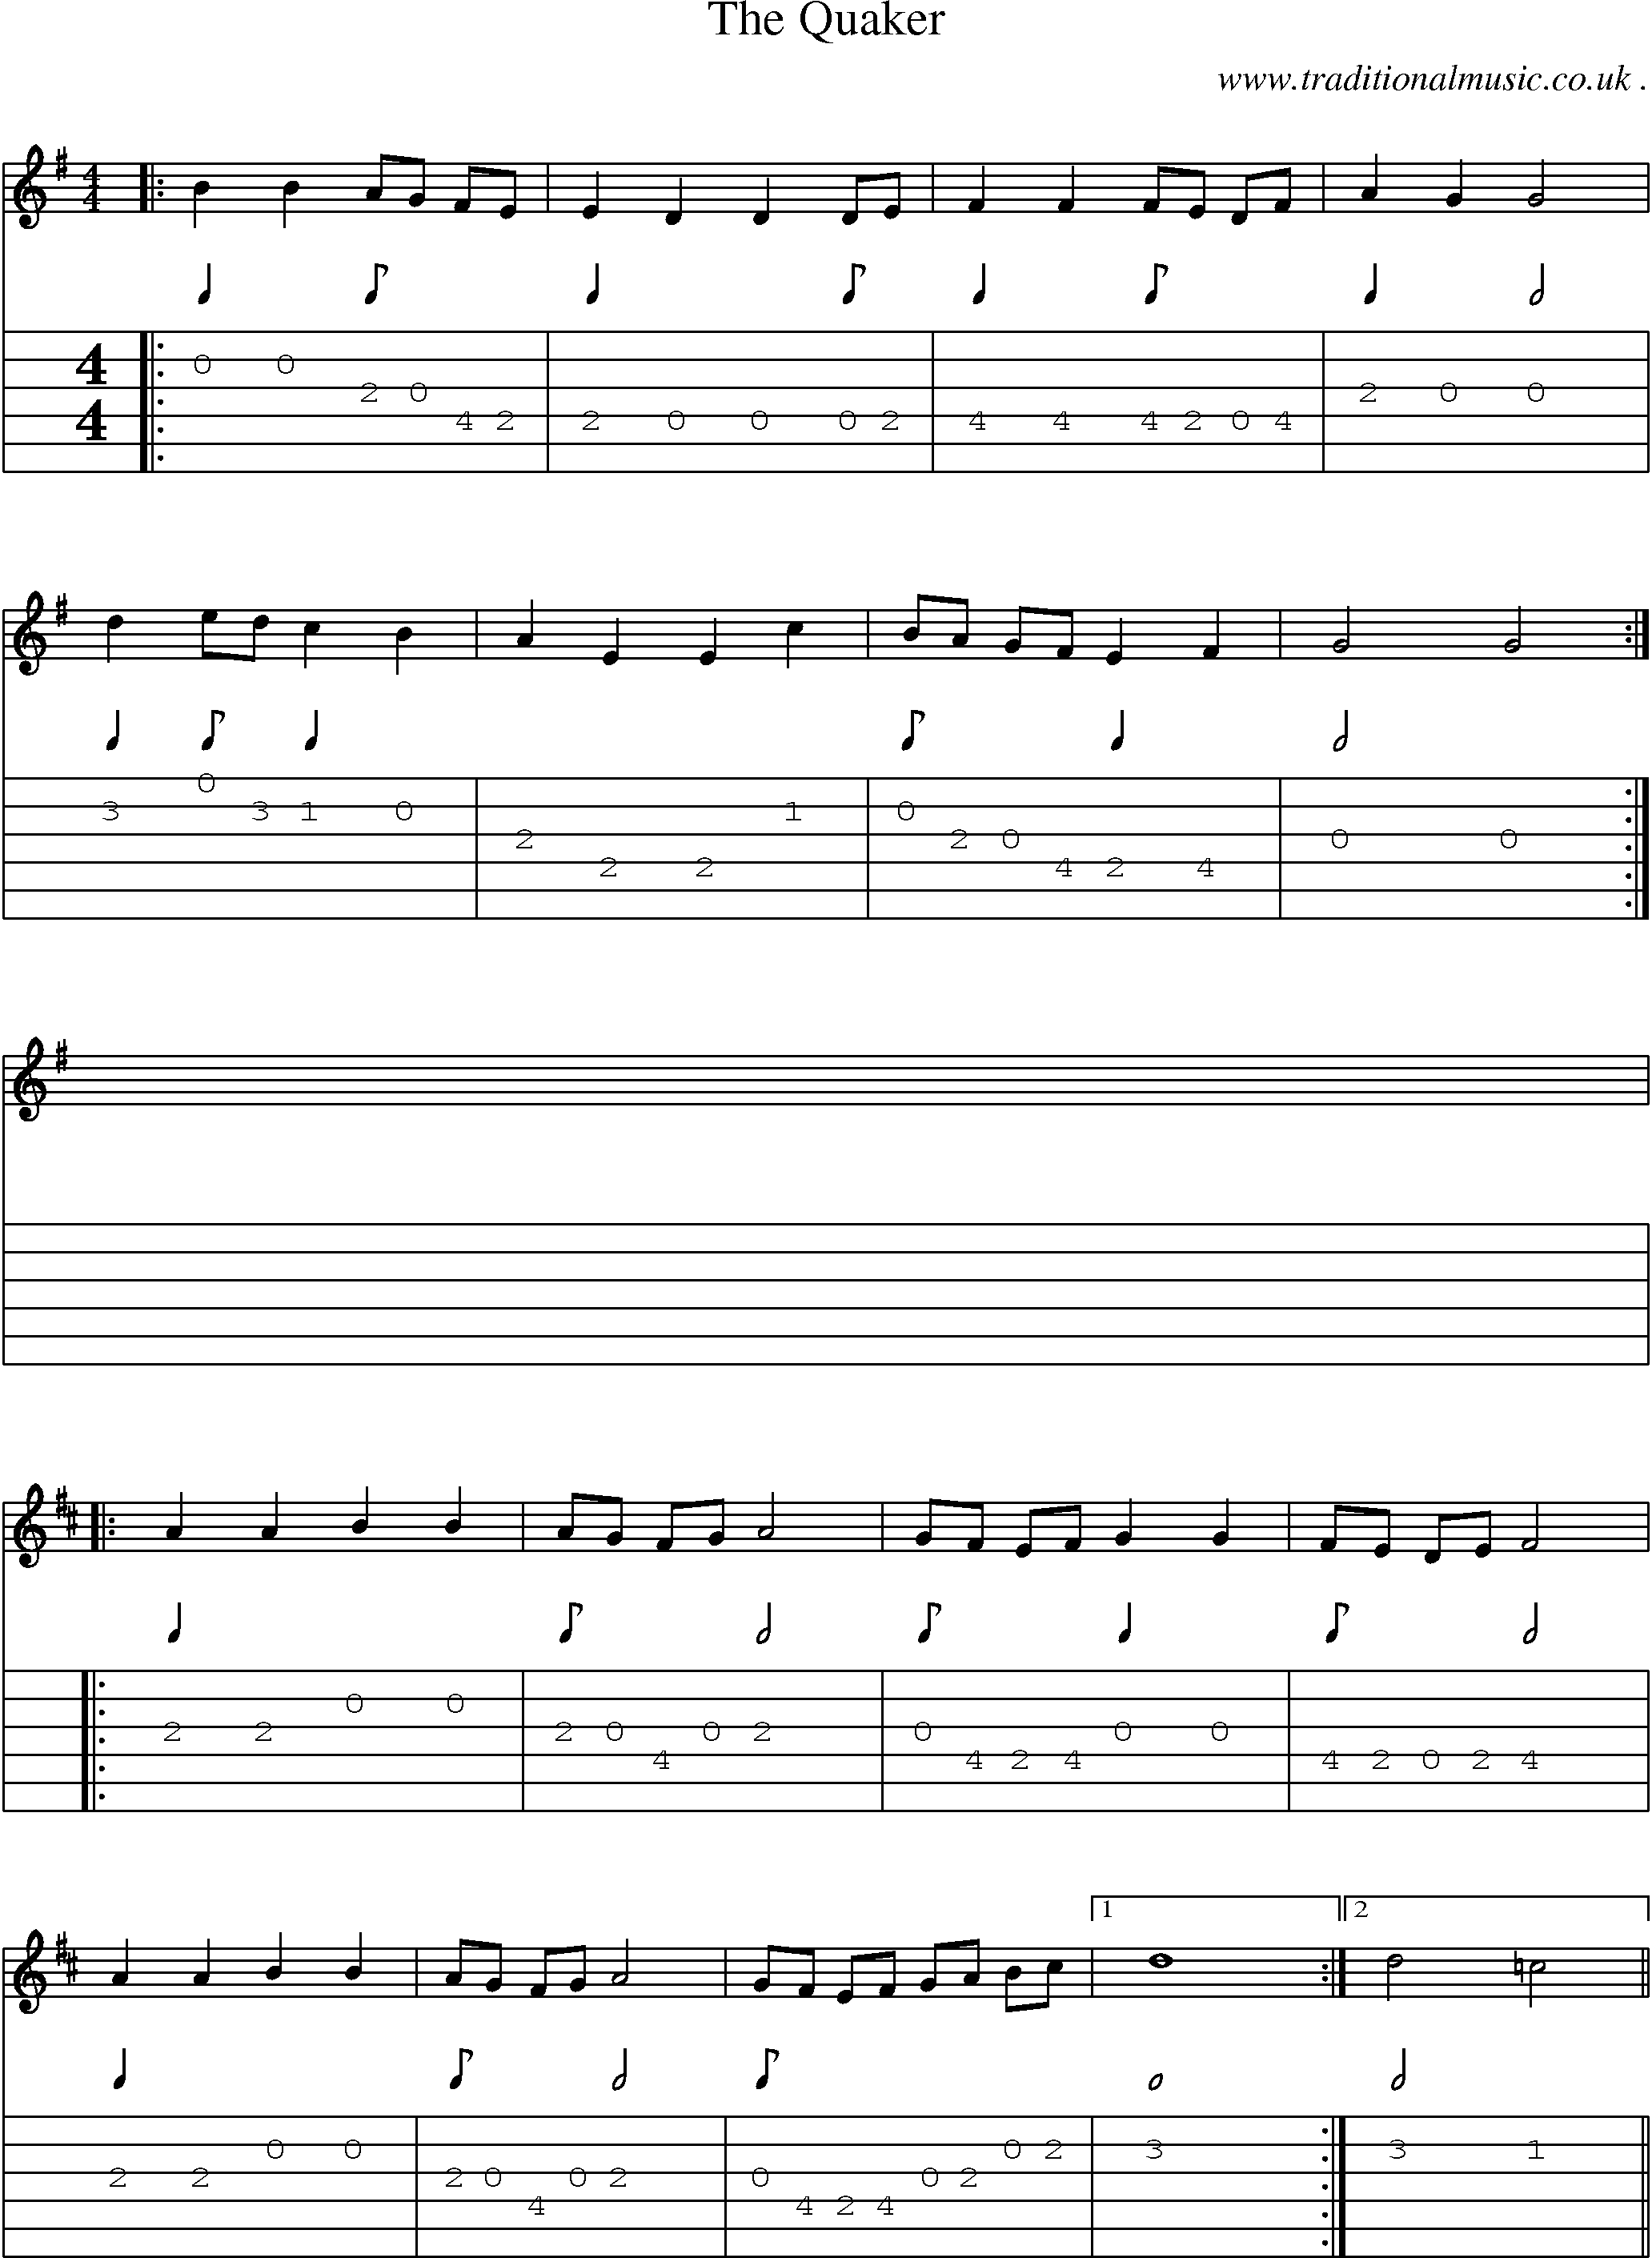 Sheet-Music and Guitar Tabs for The Quaker